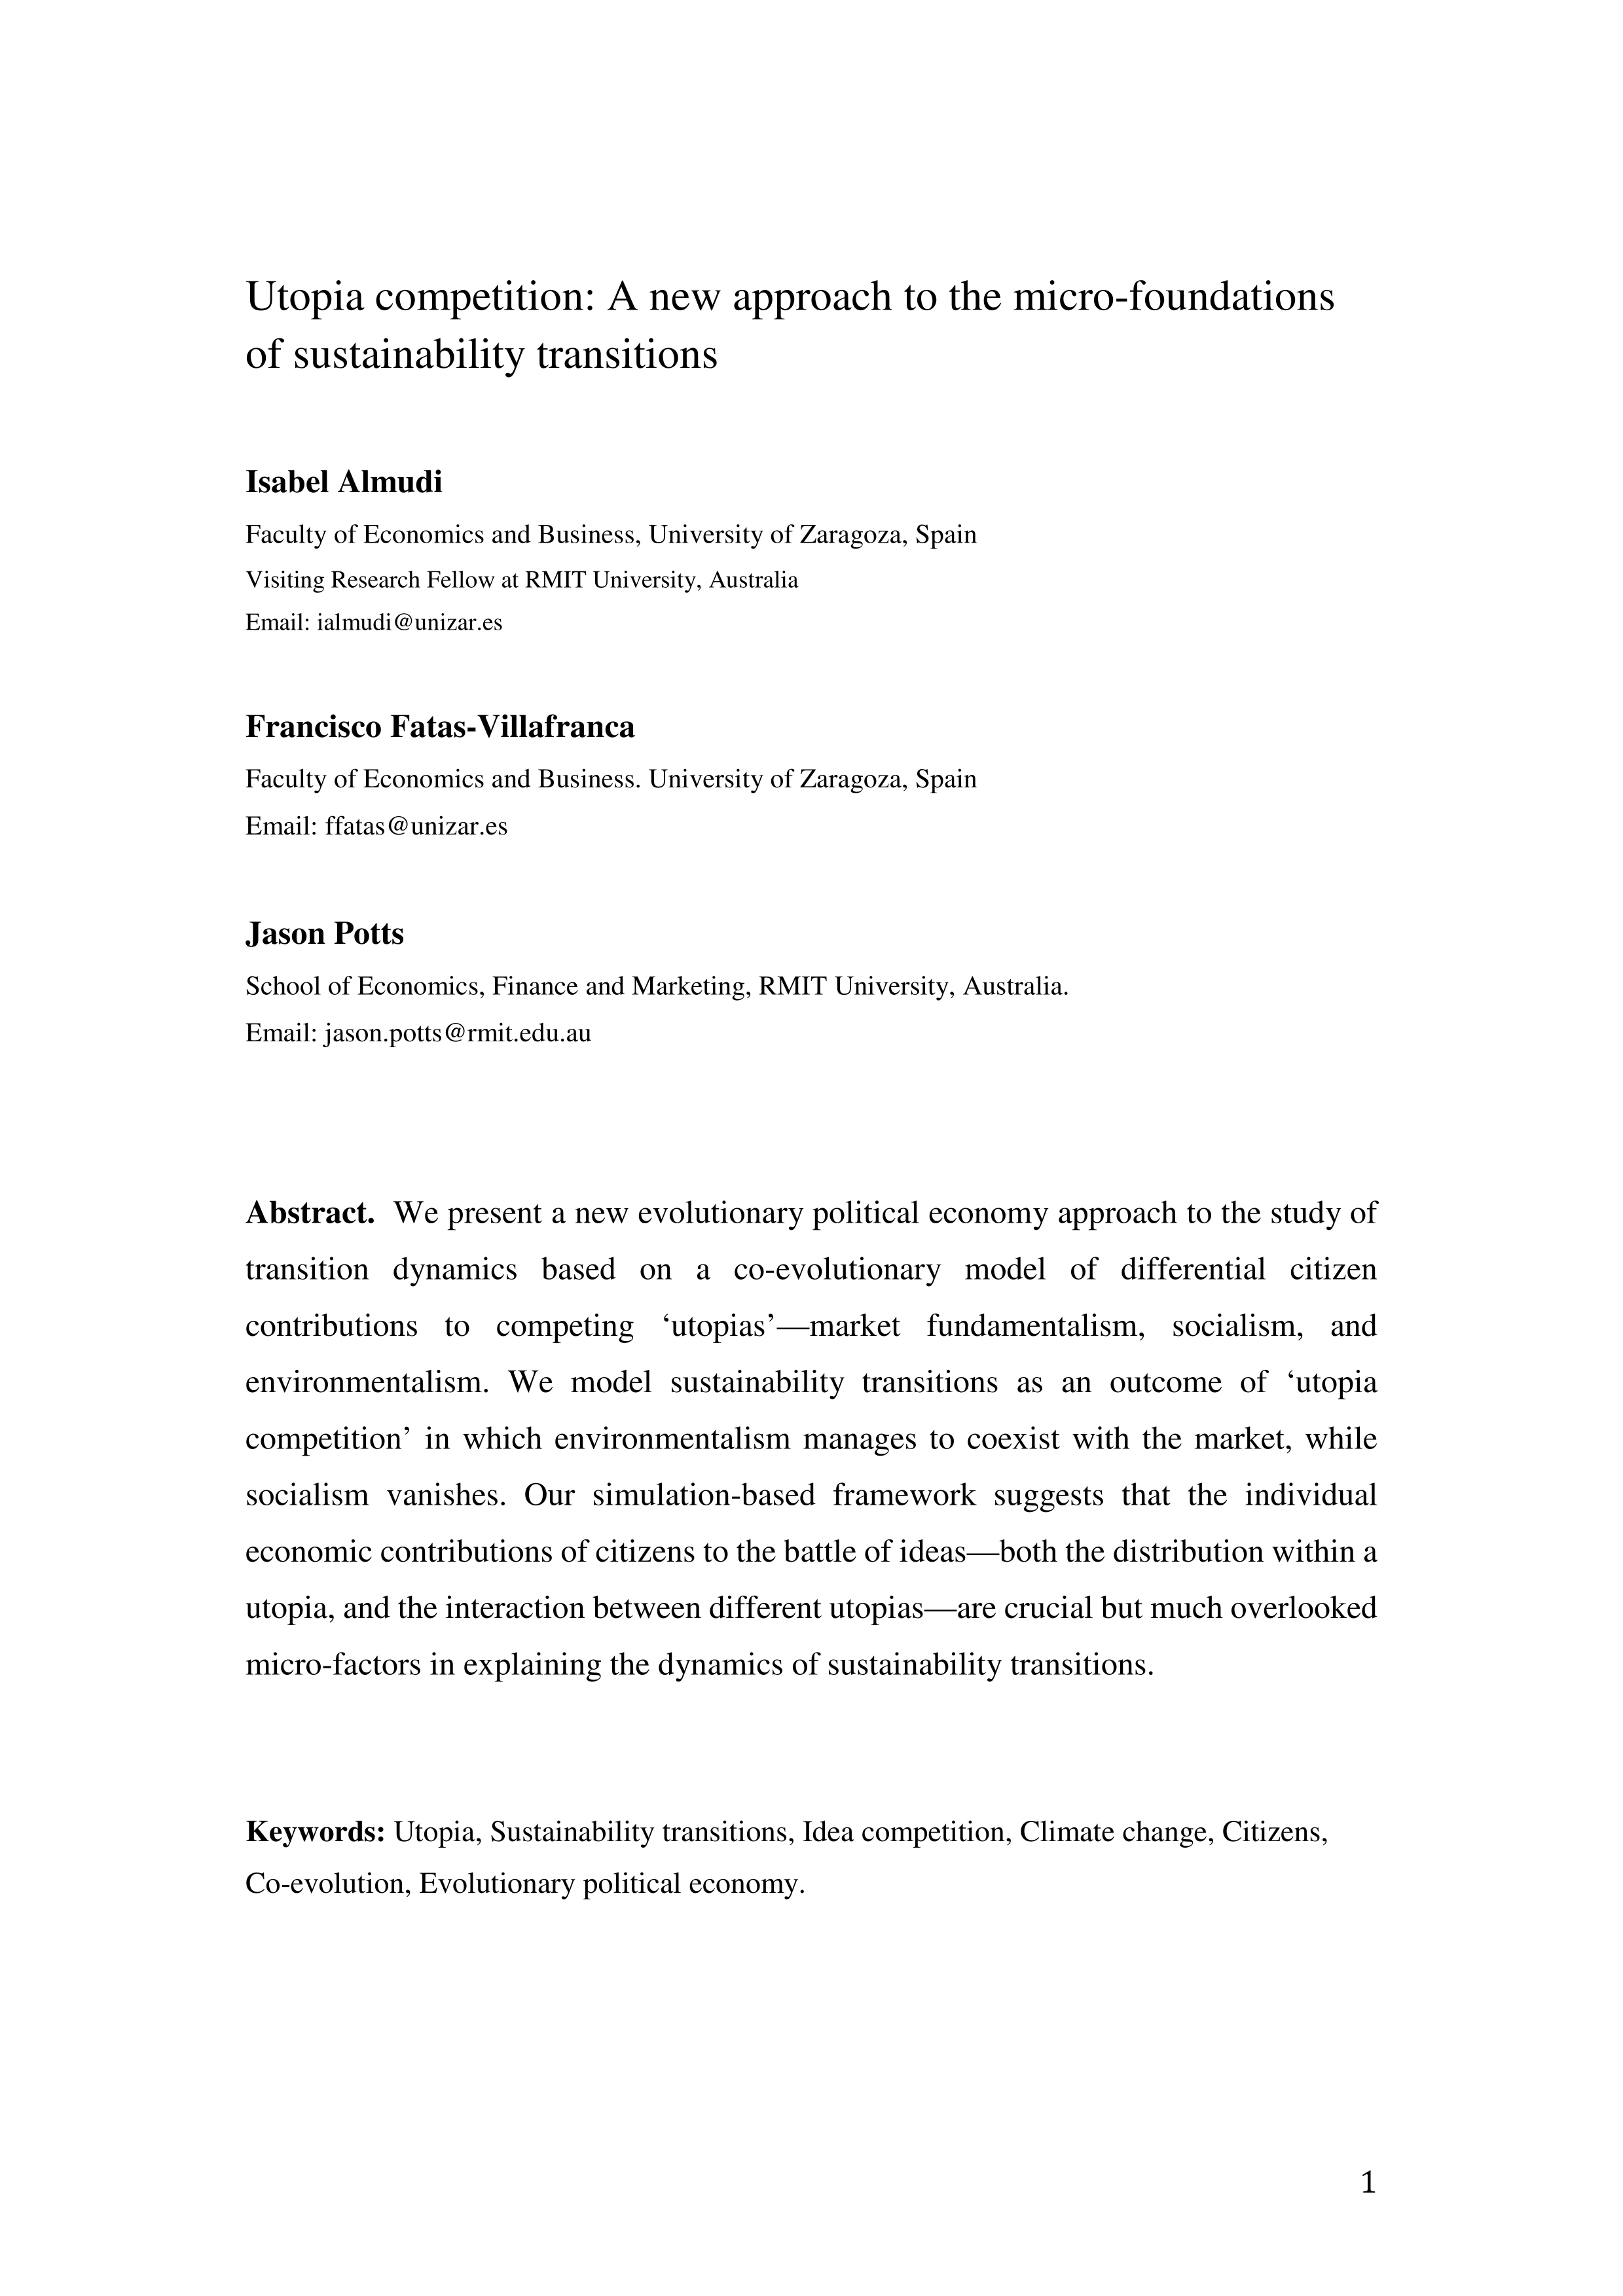 Utopia competition: a new approach to the micro-foundations of sustainability transitions